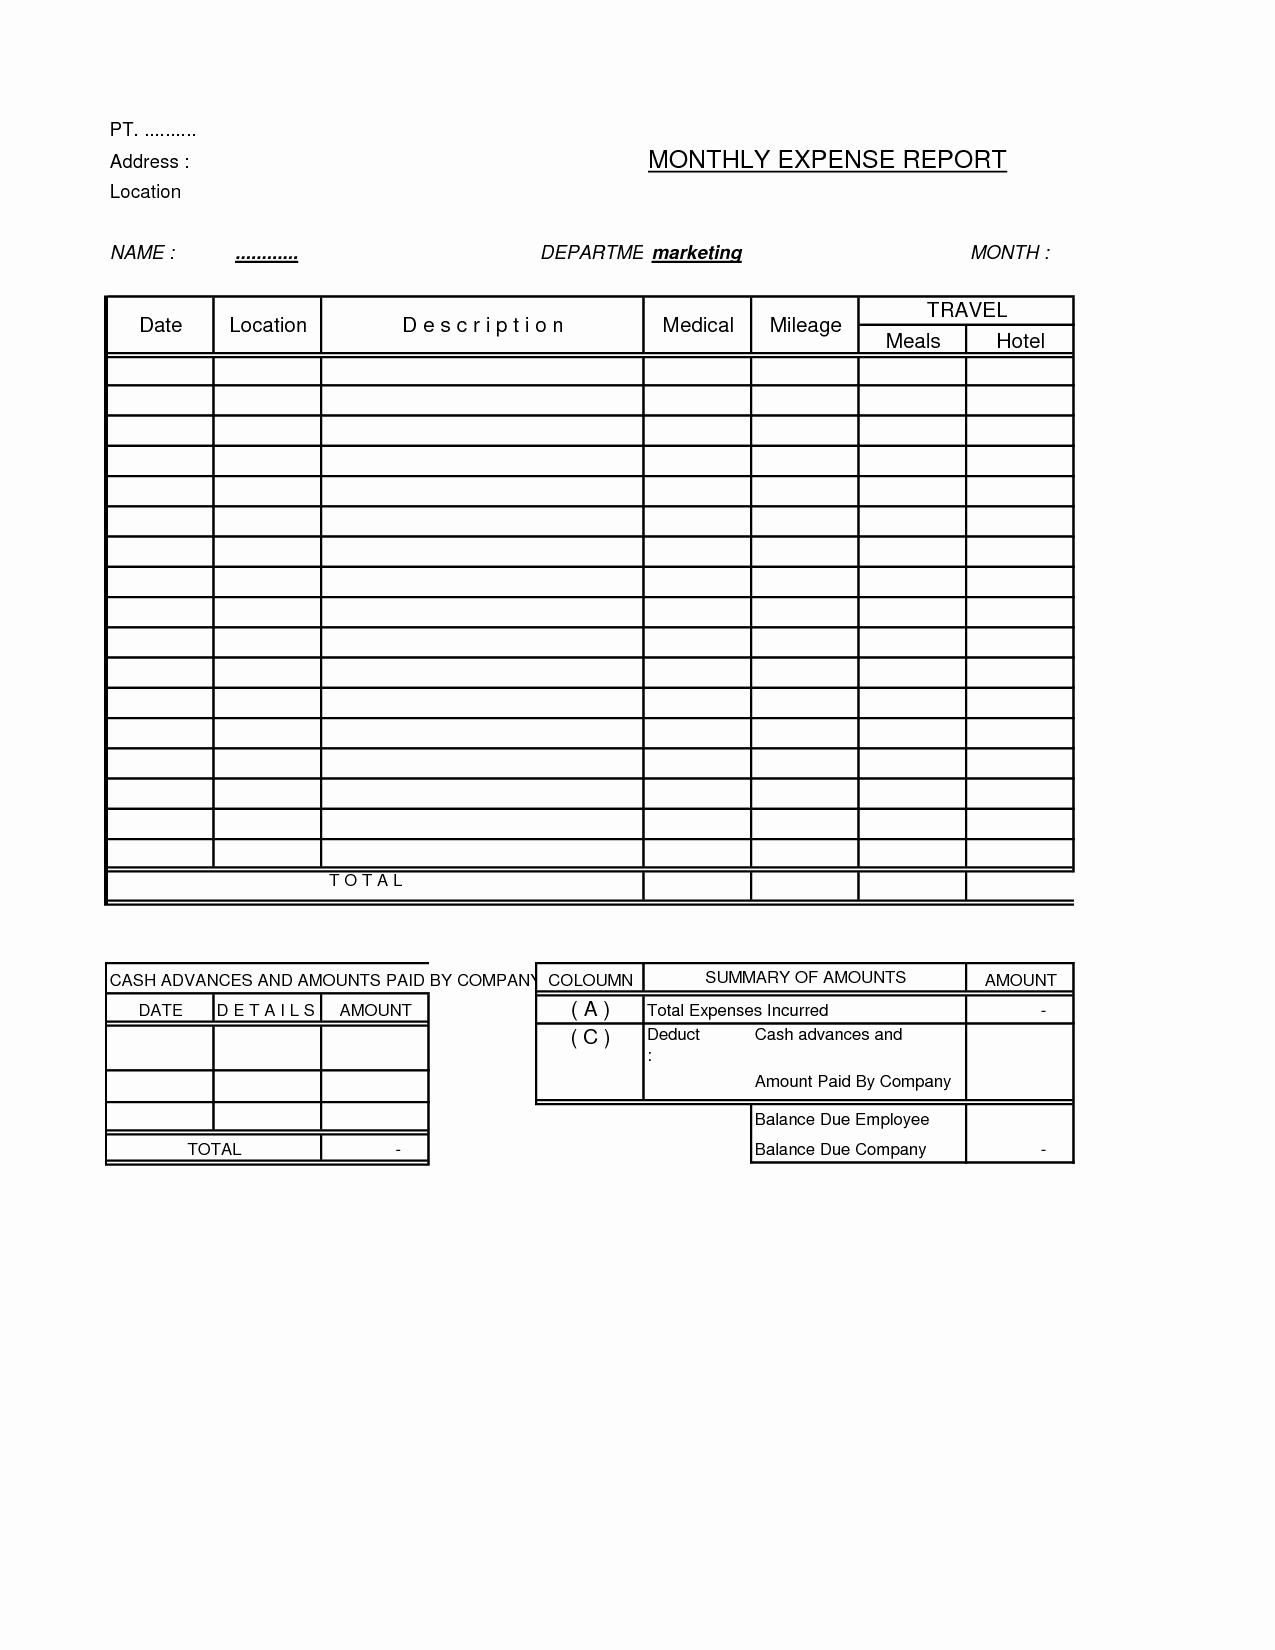 Monthly Expense Report Template Awesome Free Expense Report form Sample to Track Pany Expenses